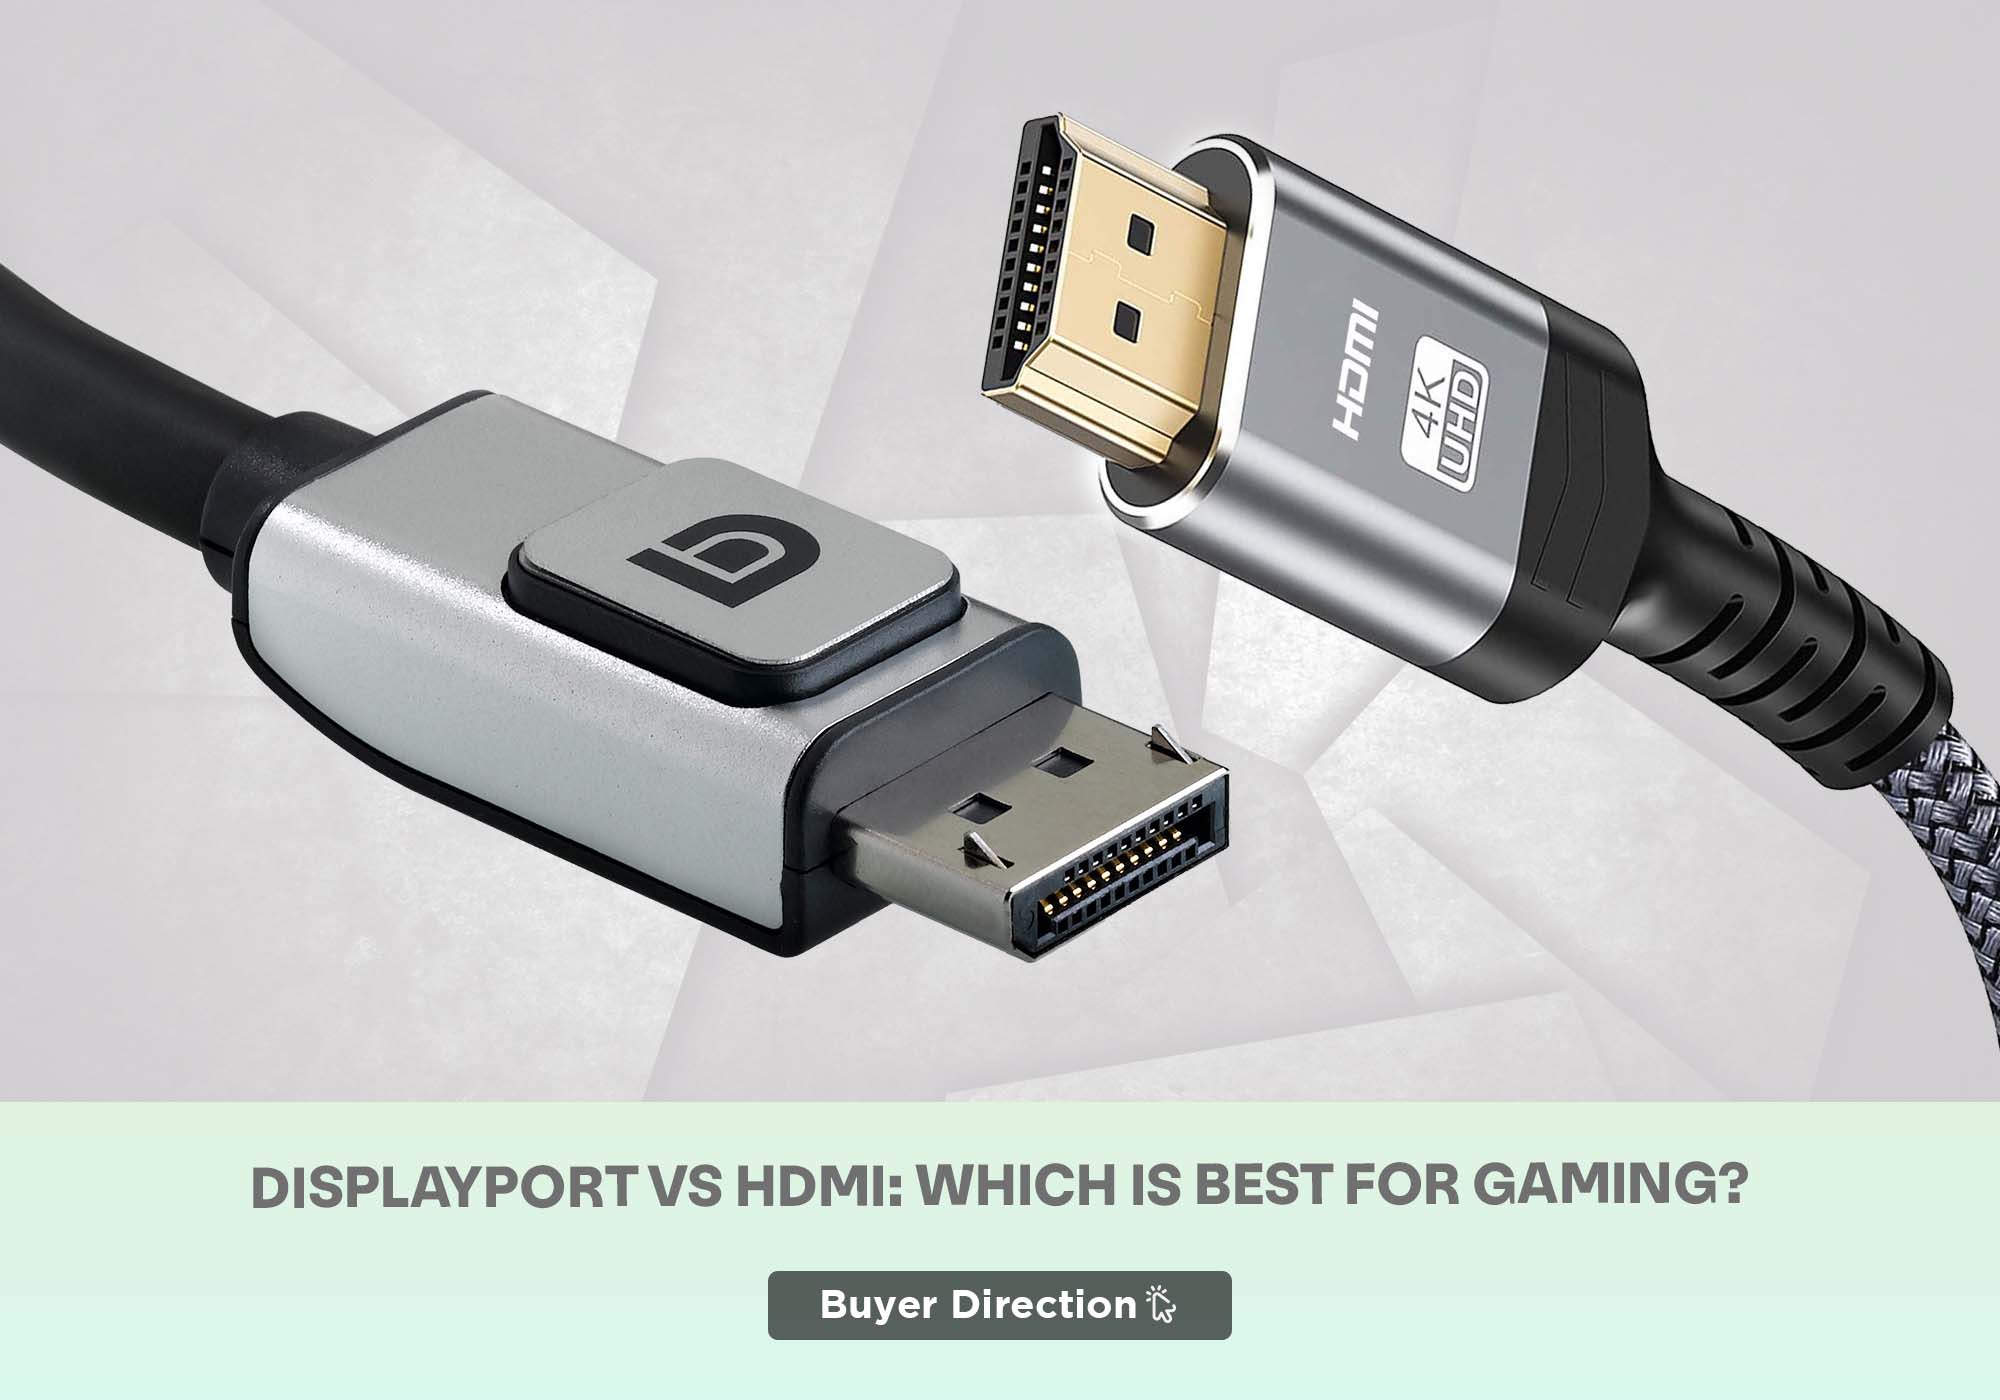 Displayport VS HDMI: Which Is Best For Gaming?